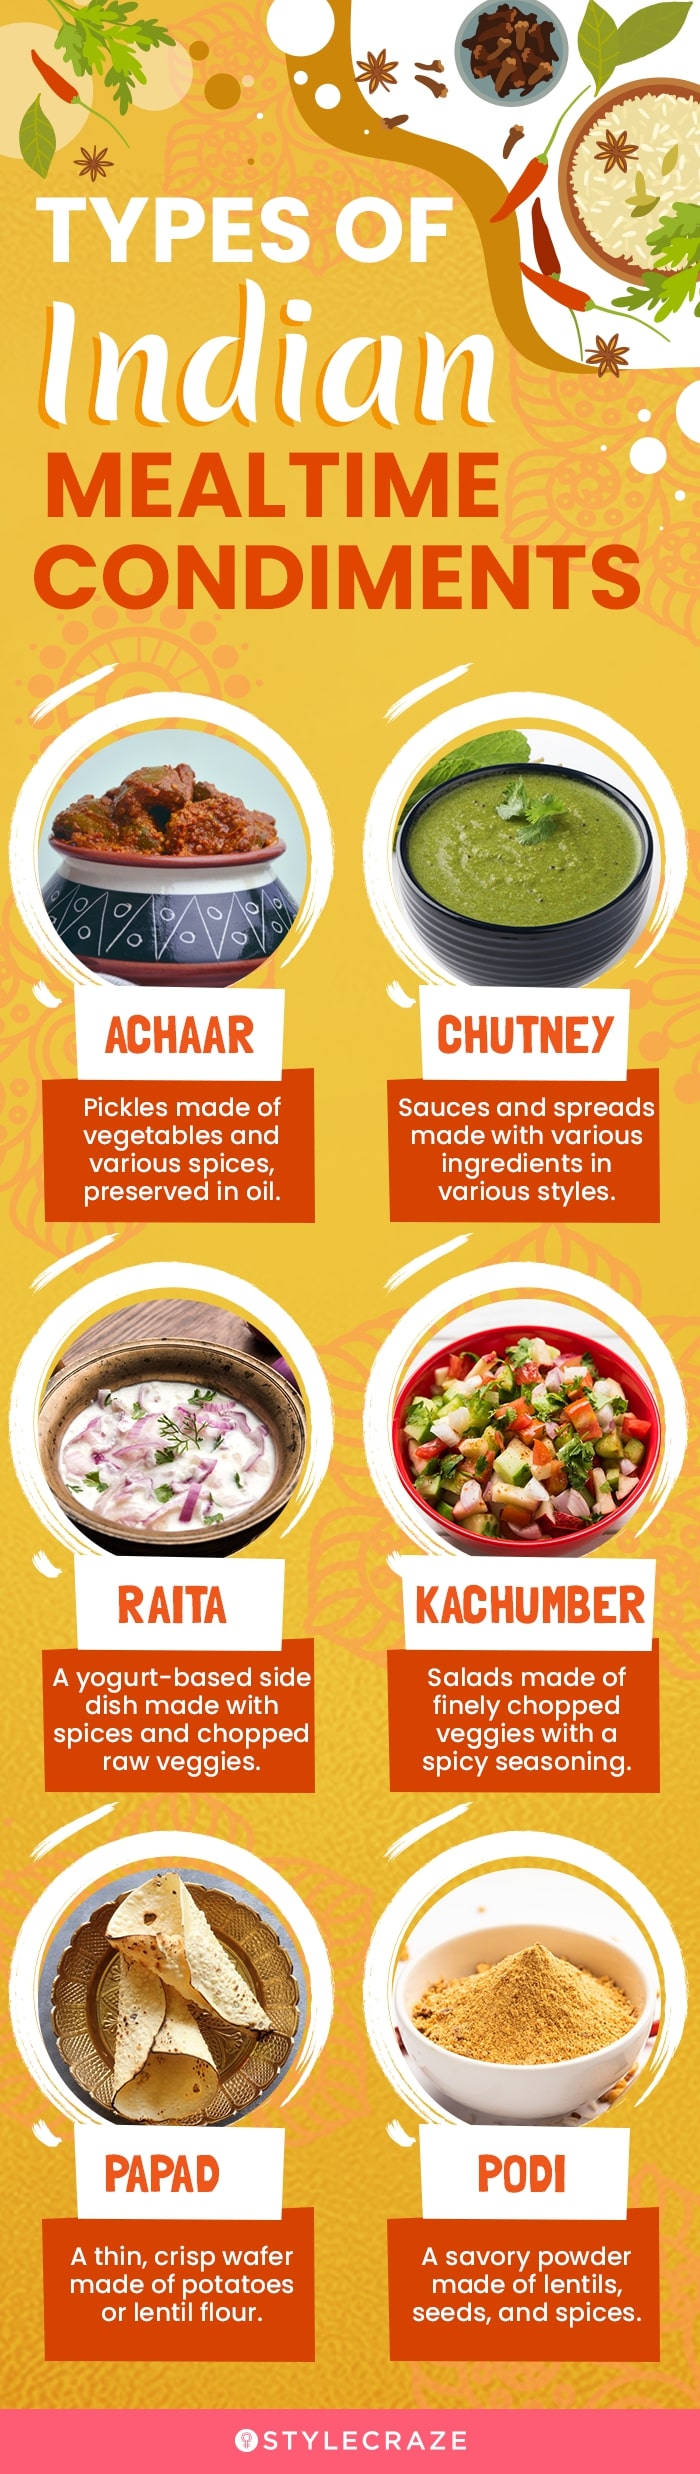 types of indian mealtime condiments [infographic]